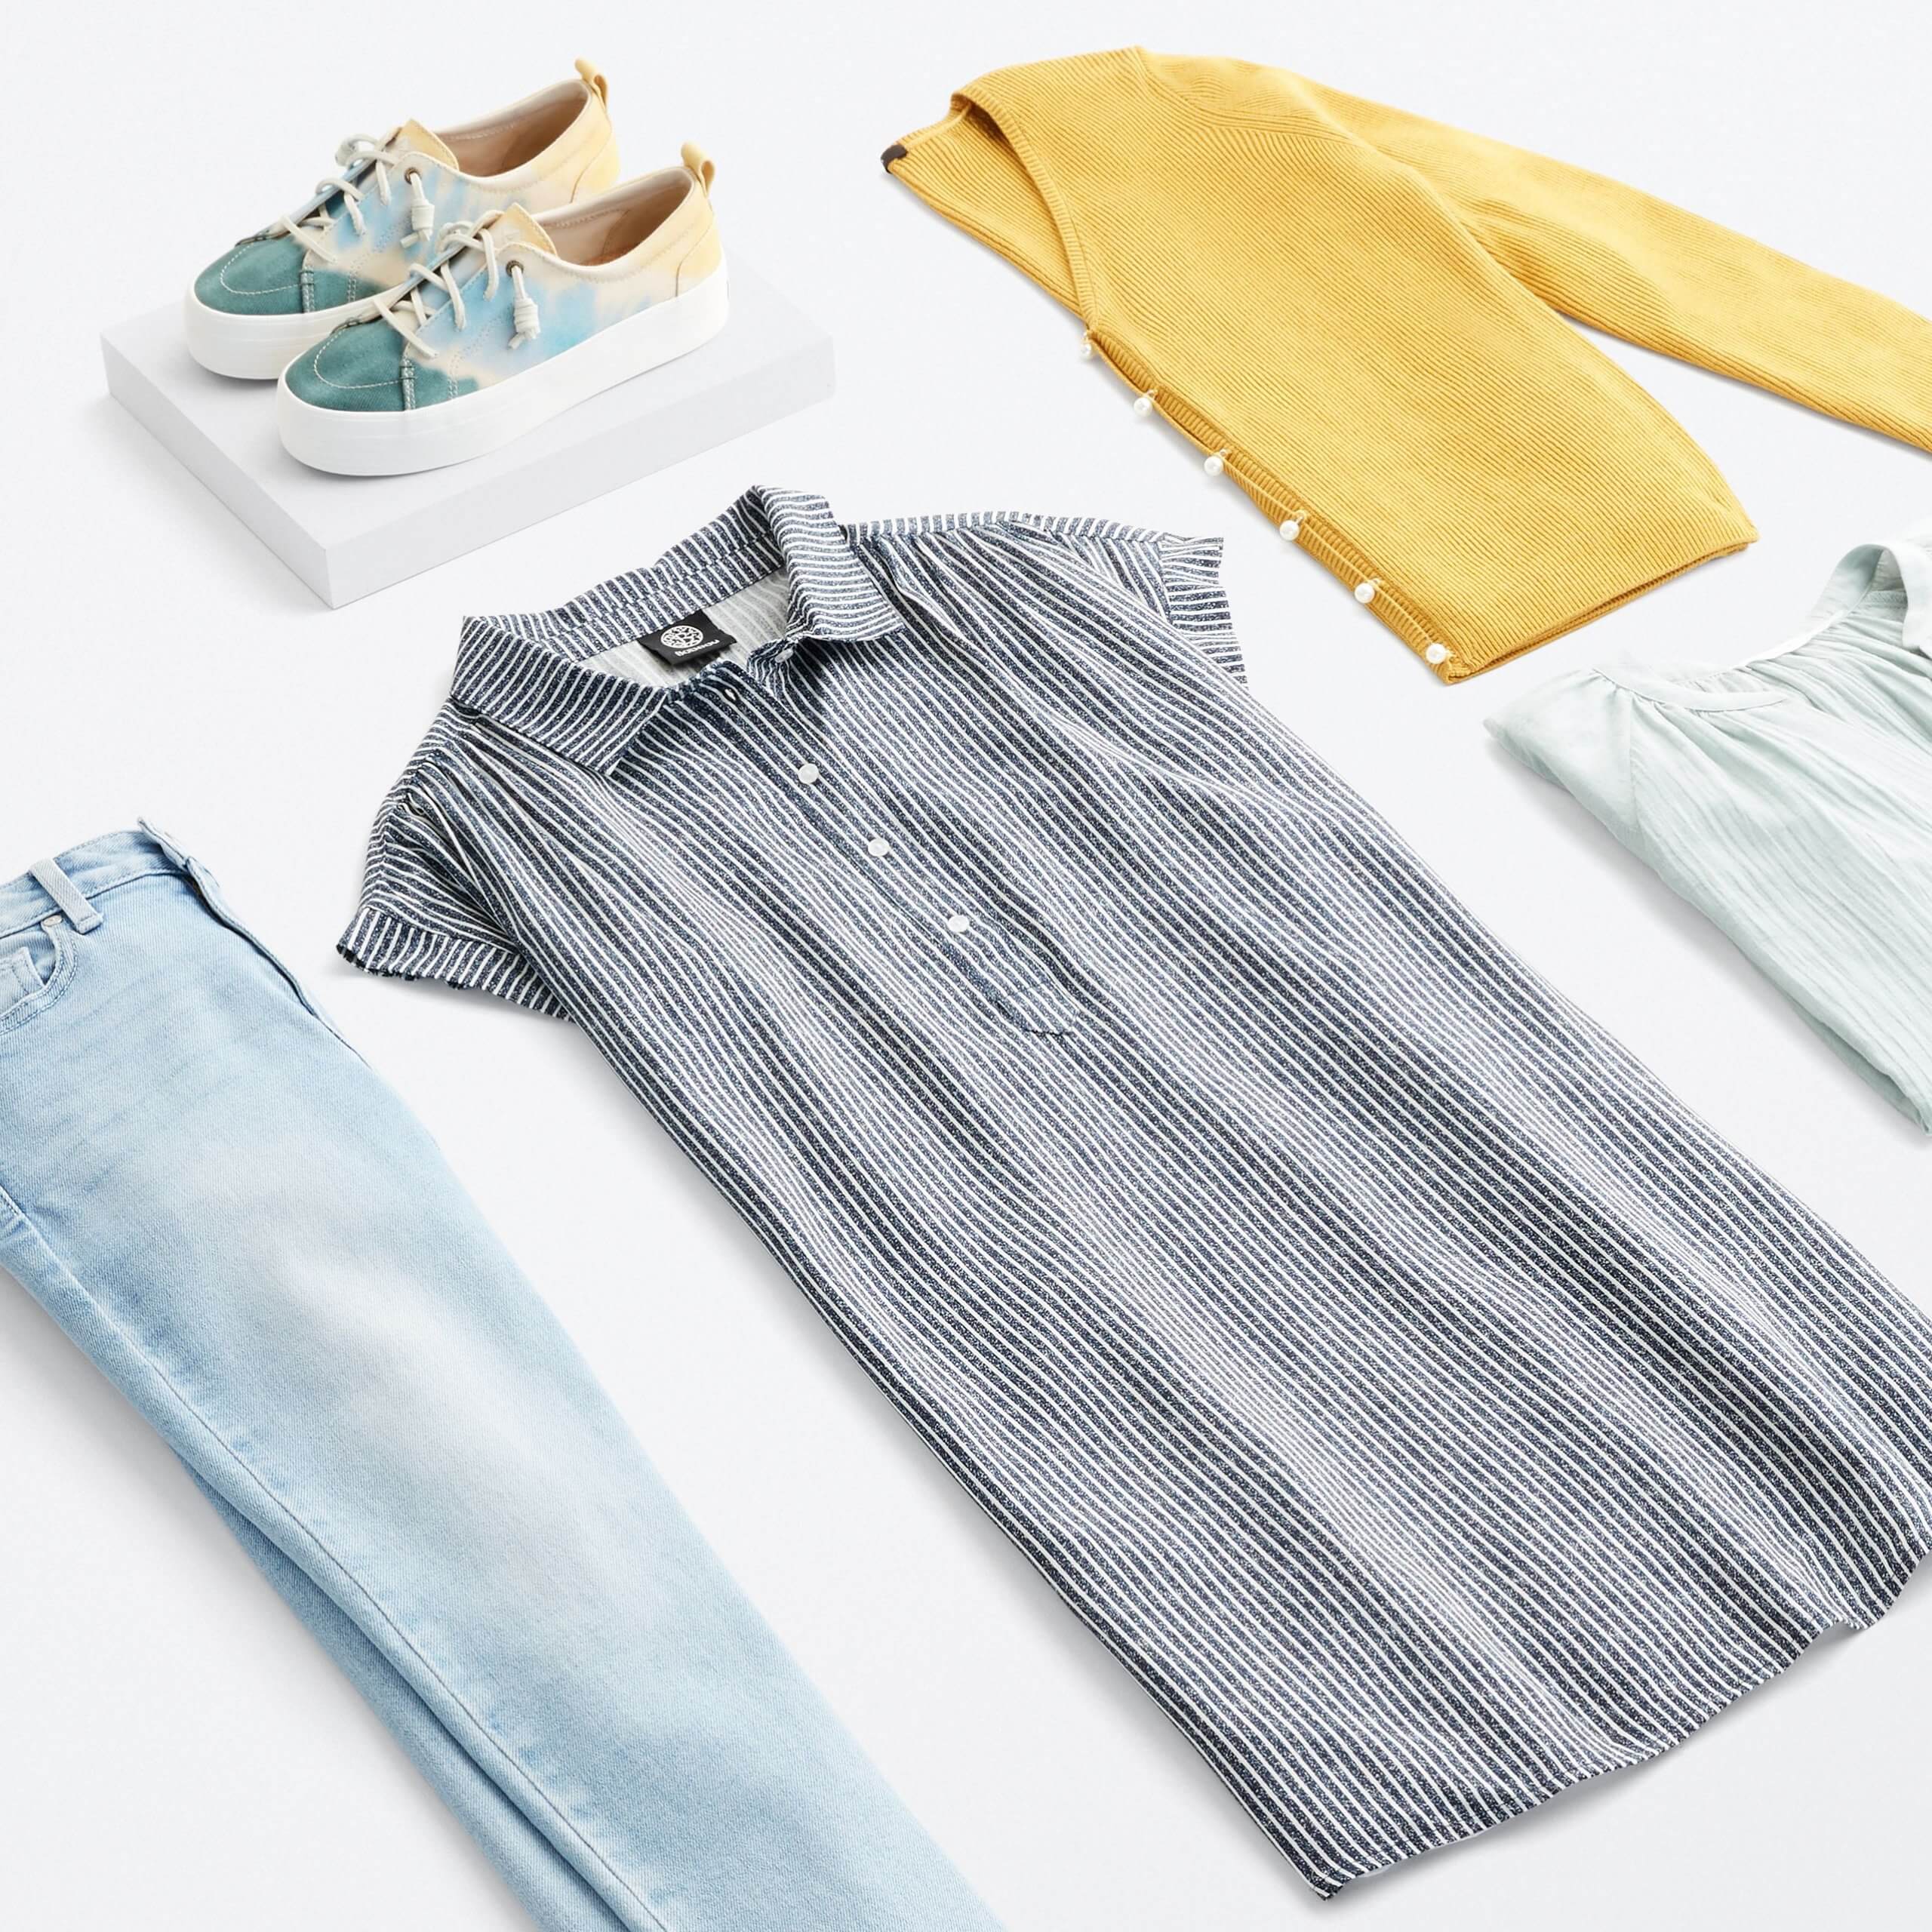 Stitch Fix Women's outfit laydown featuring grey striped collared dress, yellow cardigan, mint ruffle top, light wash jeans and green, blue and yellow tie-dye sneakers. 